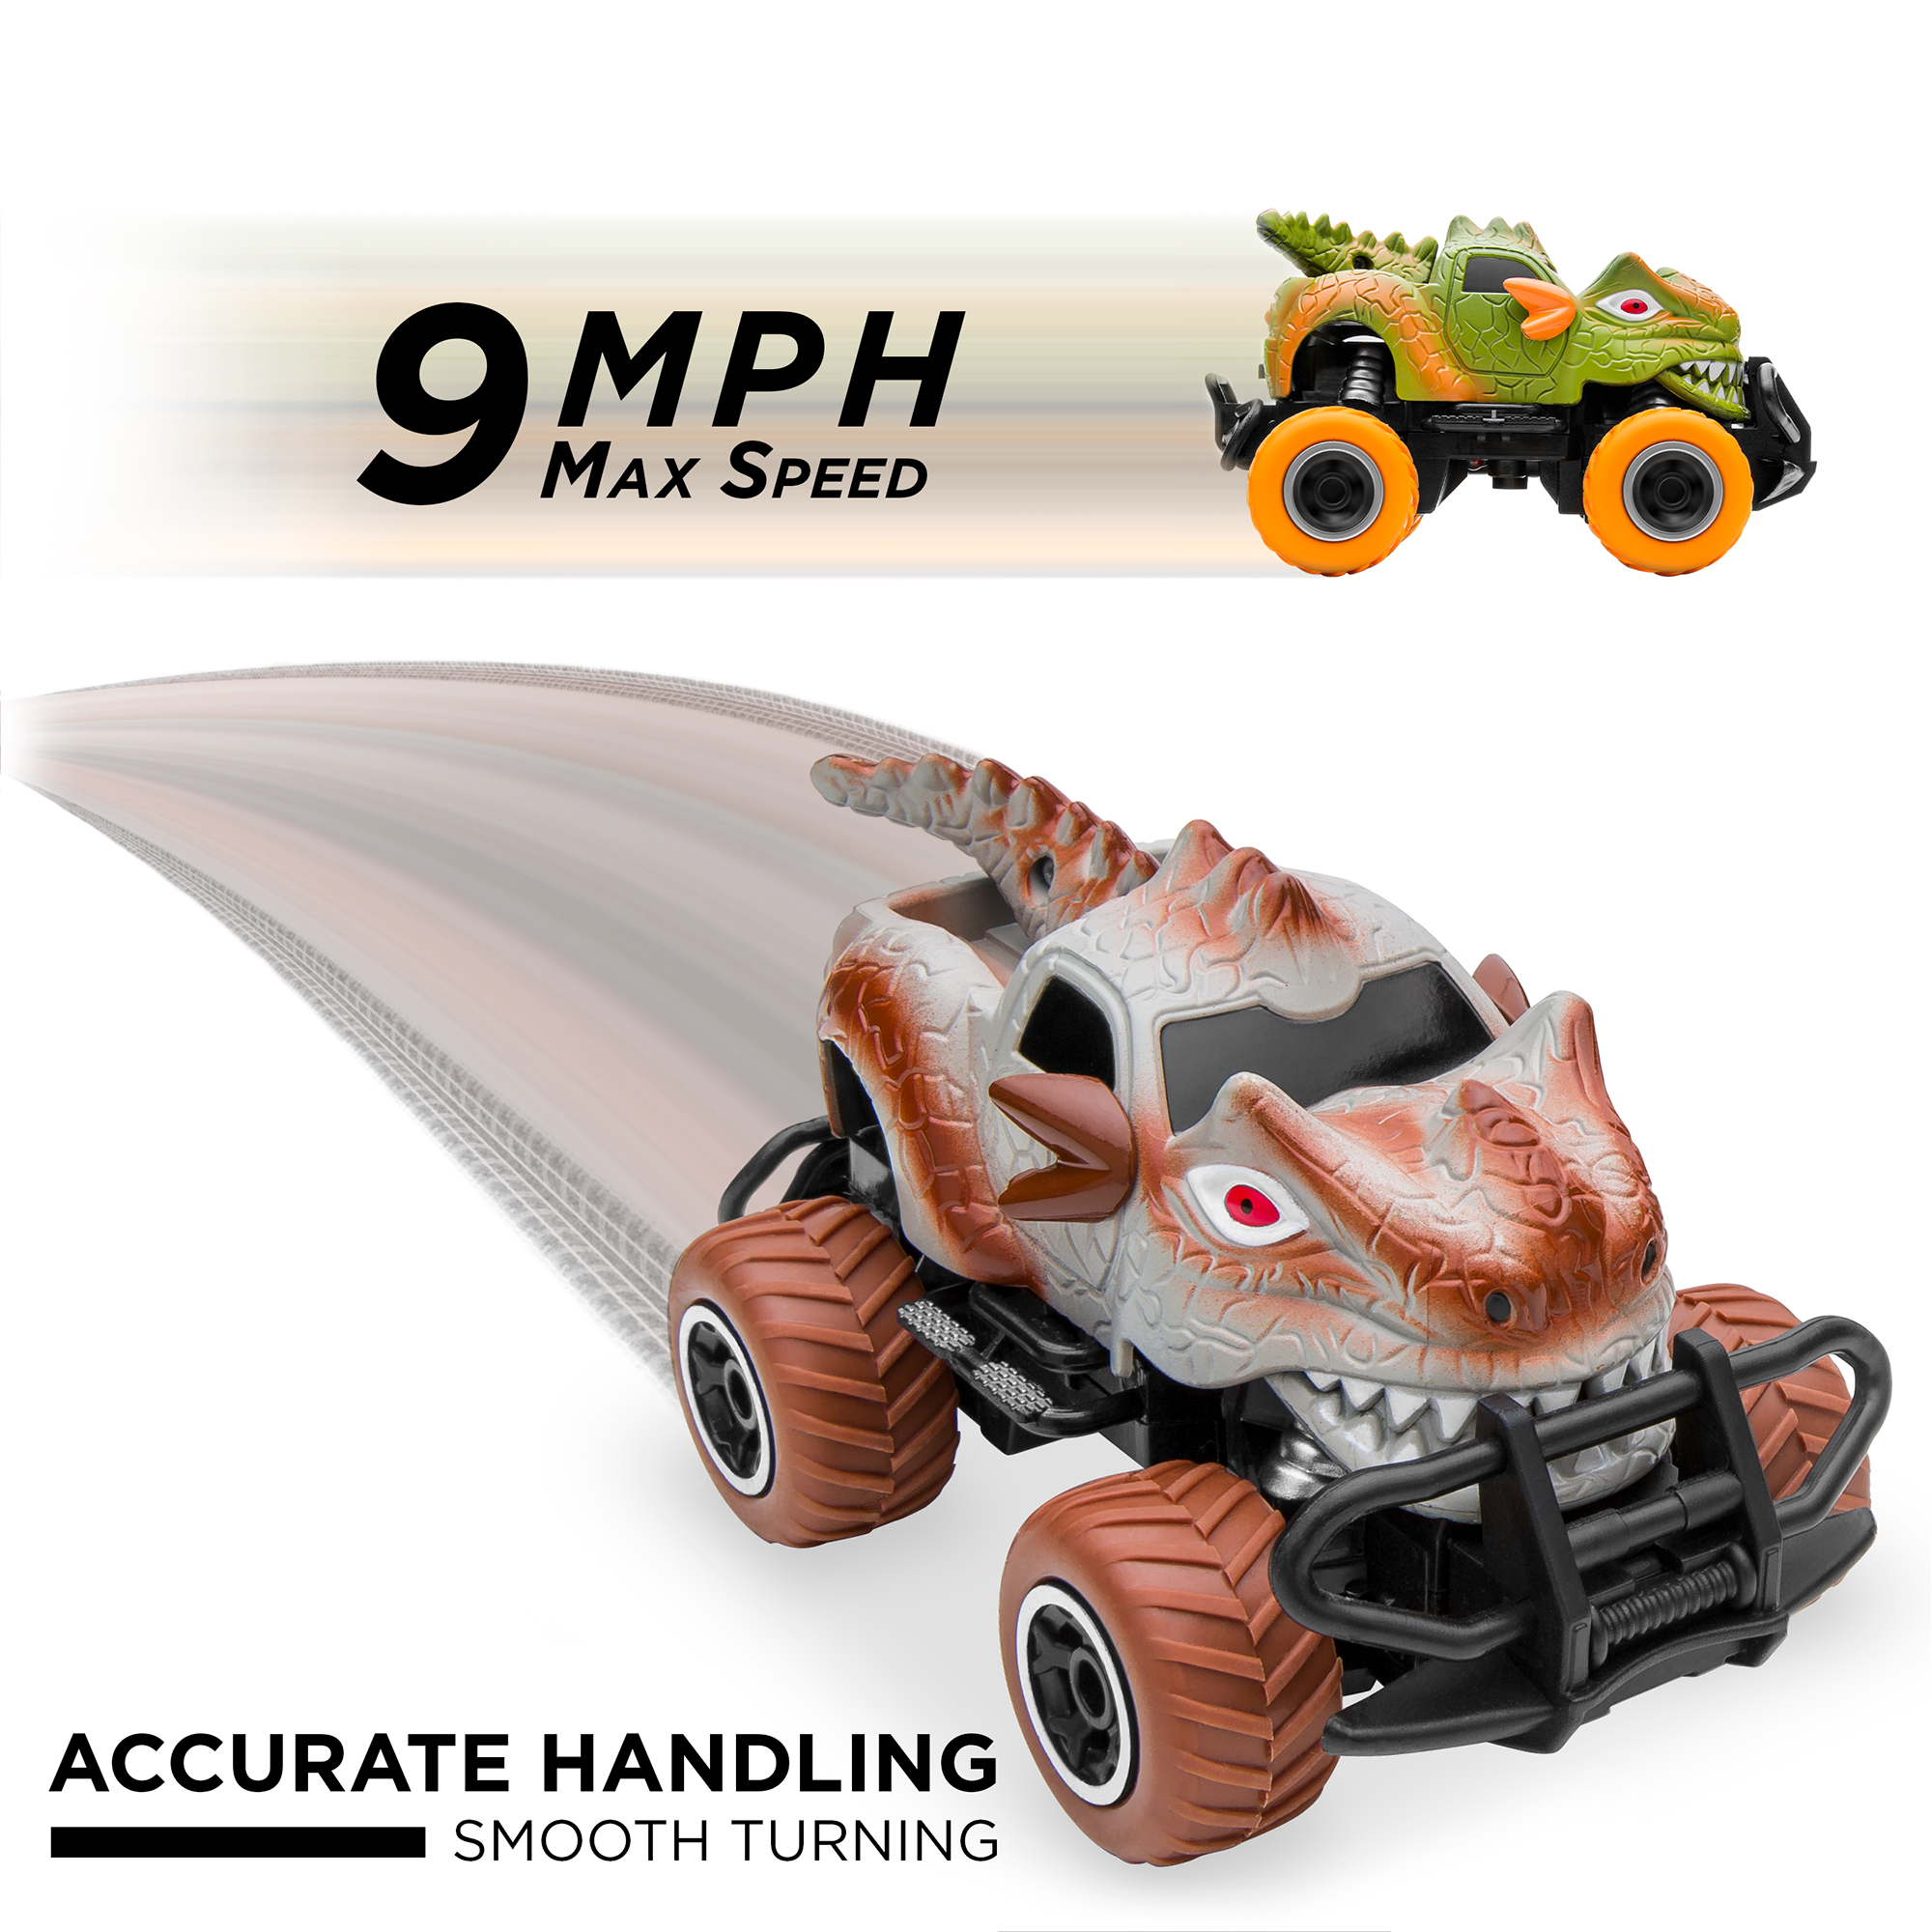 Best Choice Products Set of 2 1/43 Scale 27MHz Toy Dinosaur RC Cars w/ 2 Controllers, 9mph Max Speed - image 5 of 8